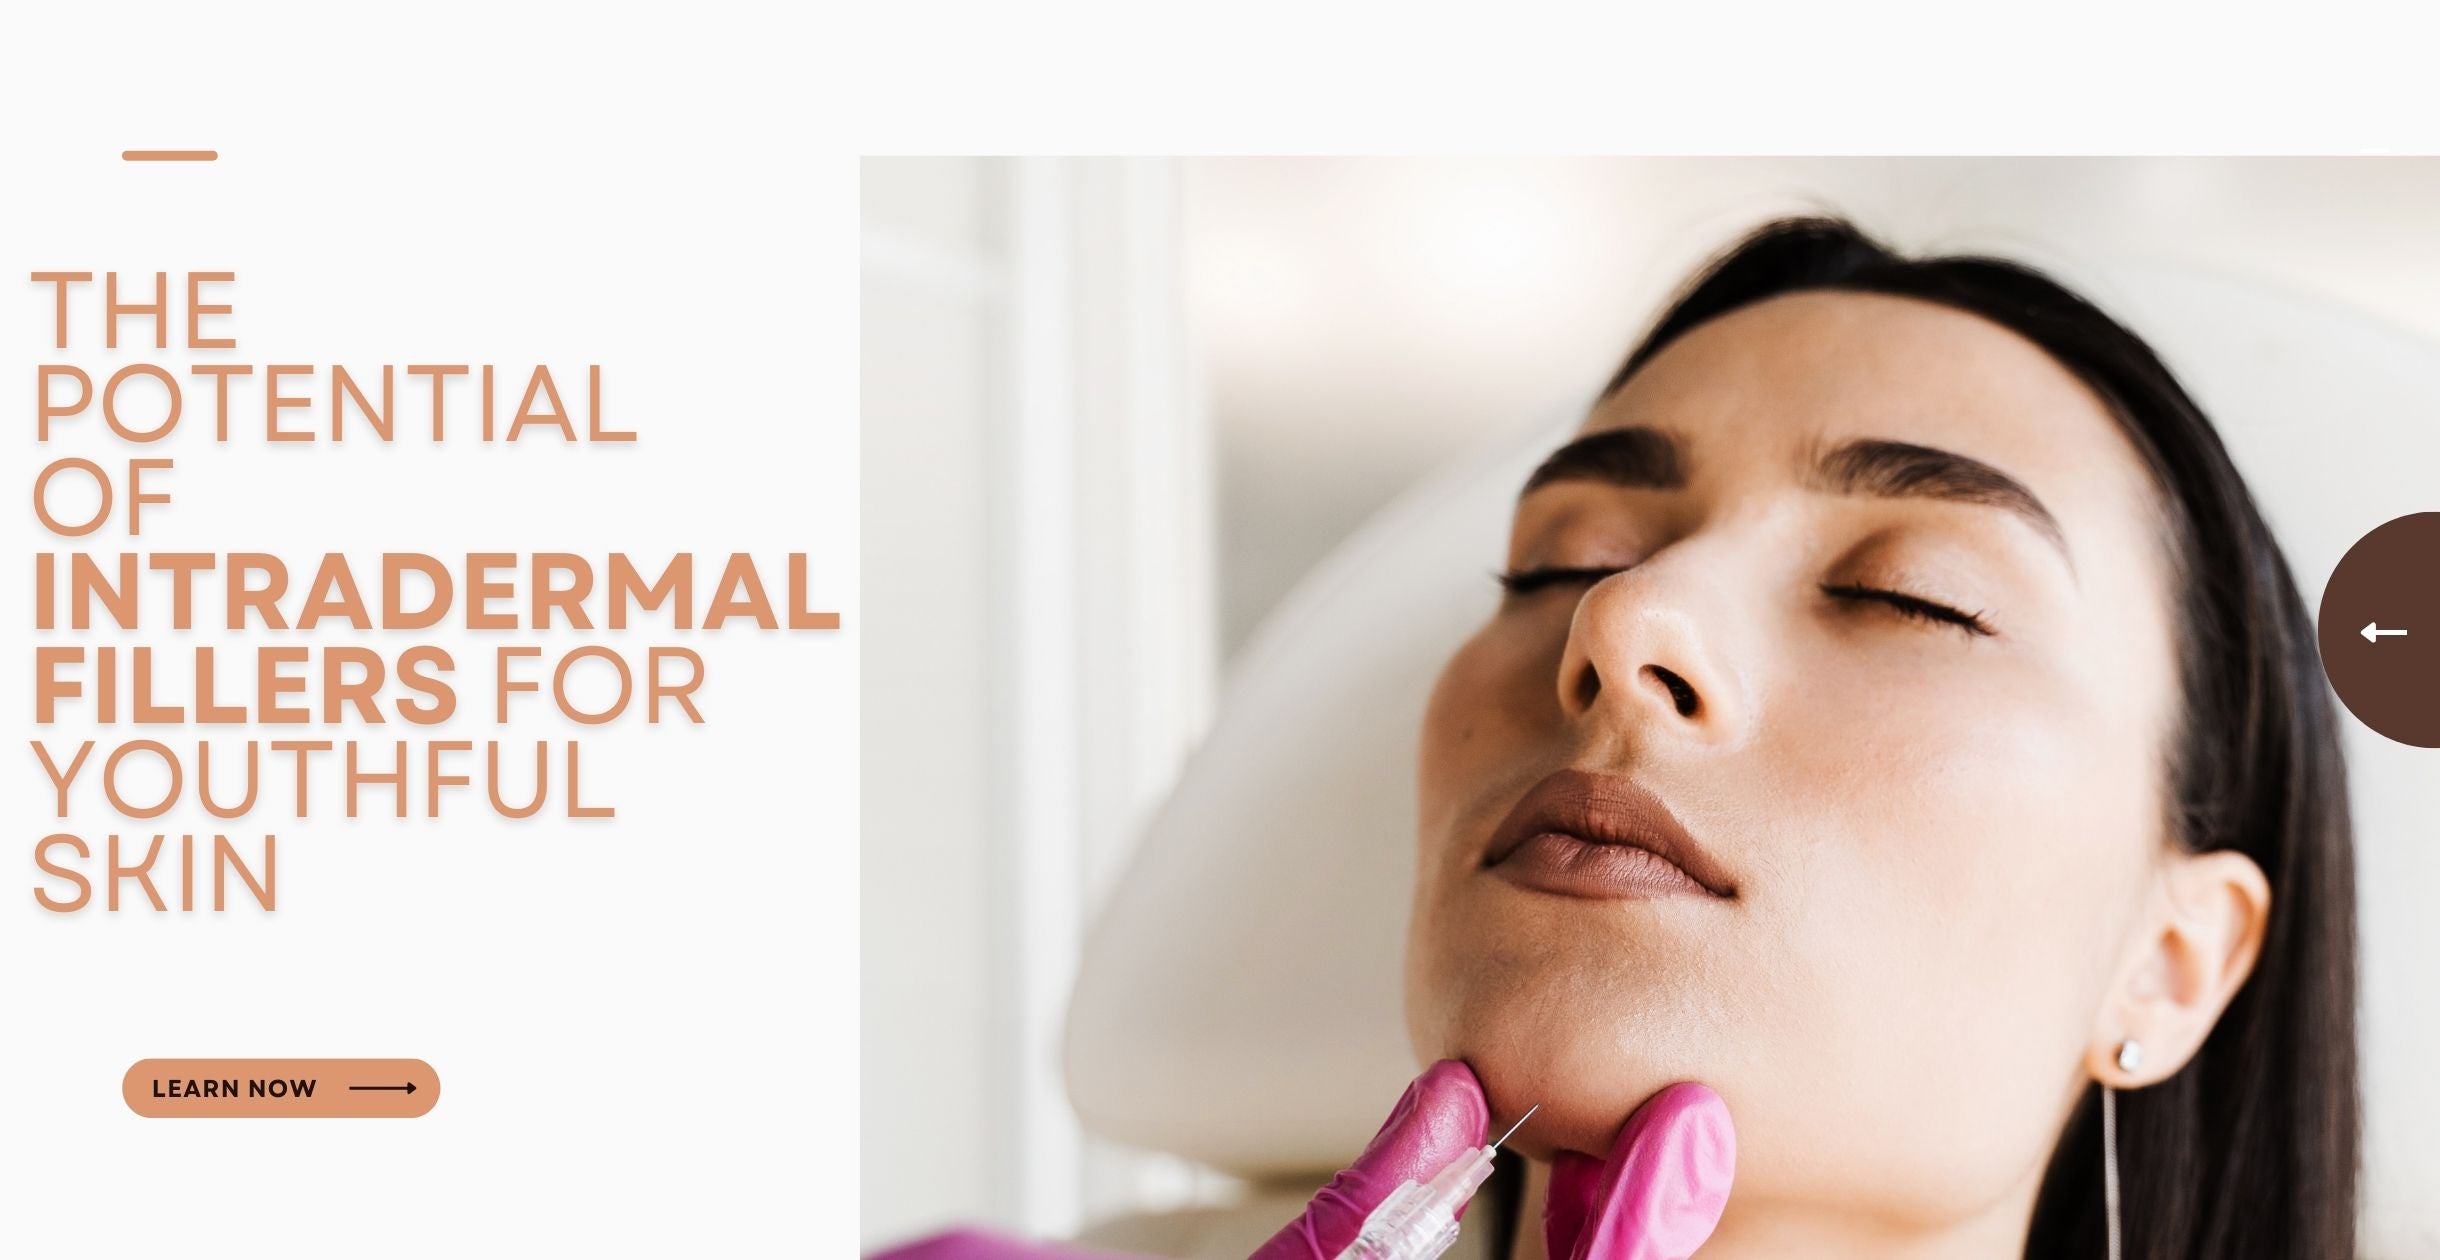 The Potential of Intradermal Fillers for Youthful Skin